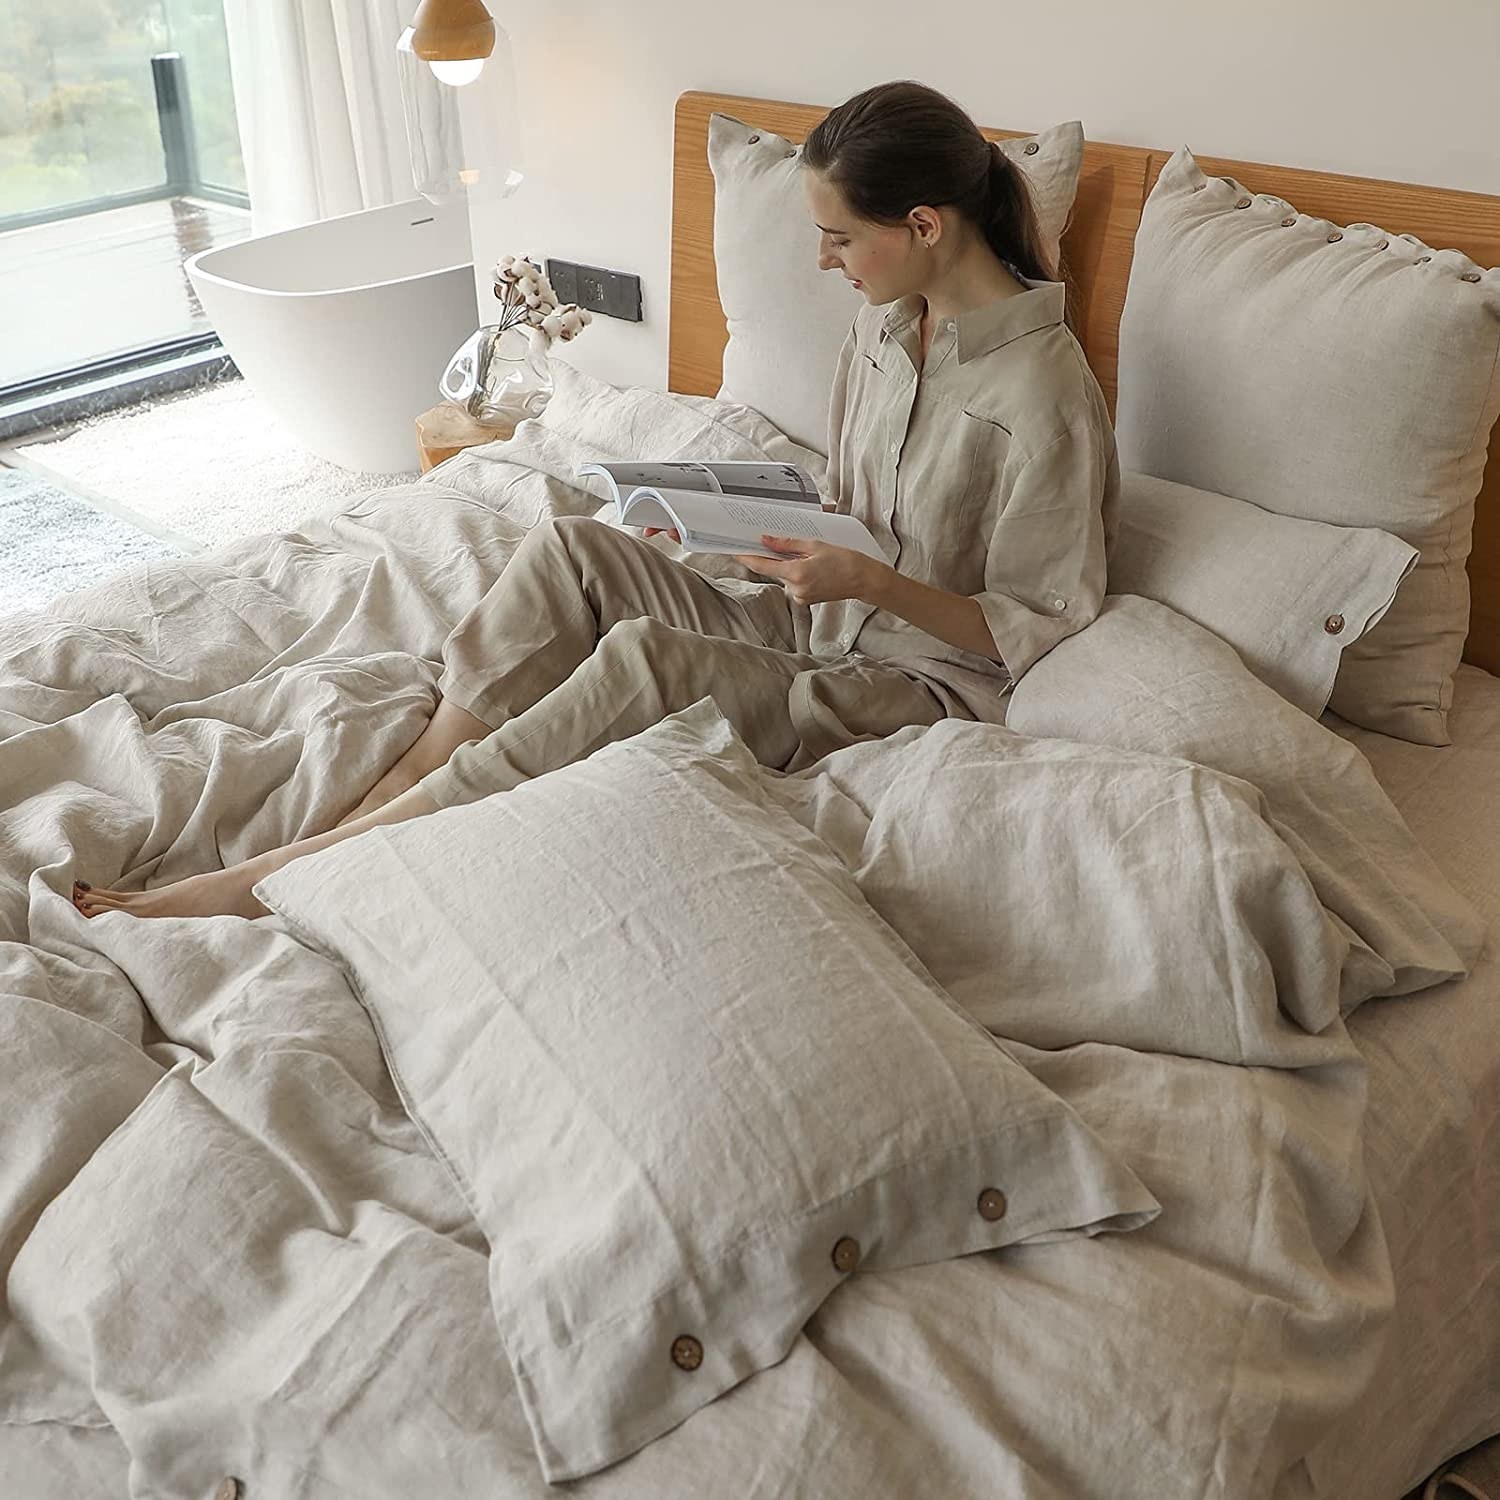 person sitting in bed with the duvet cover and pillow covers on